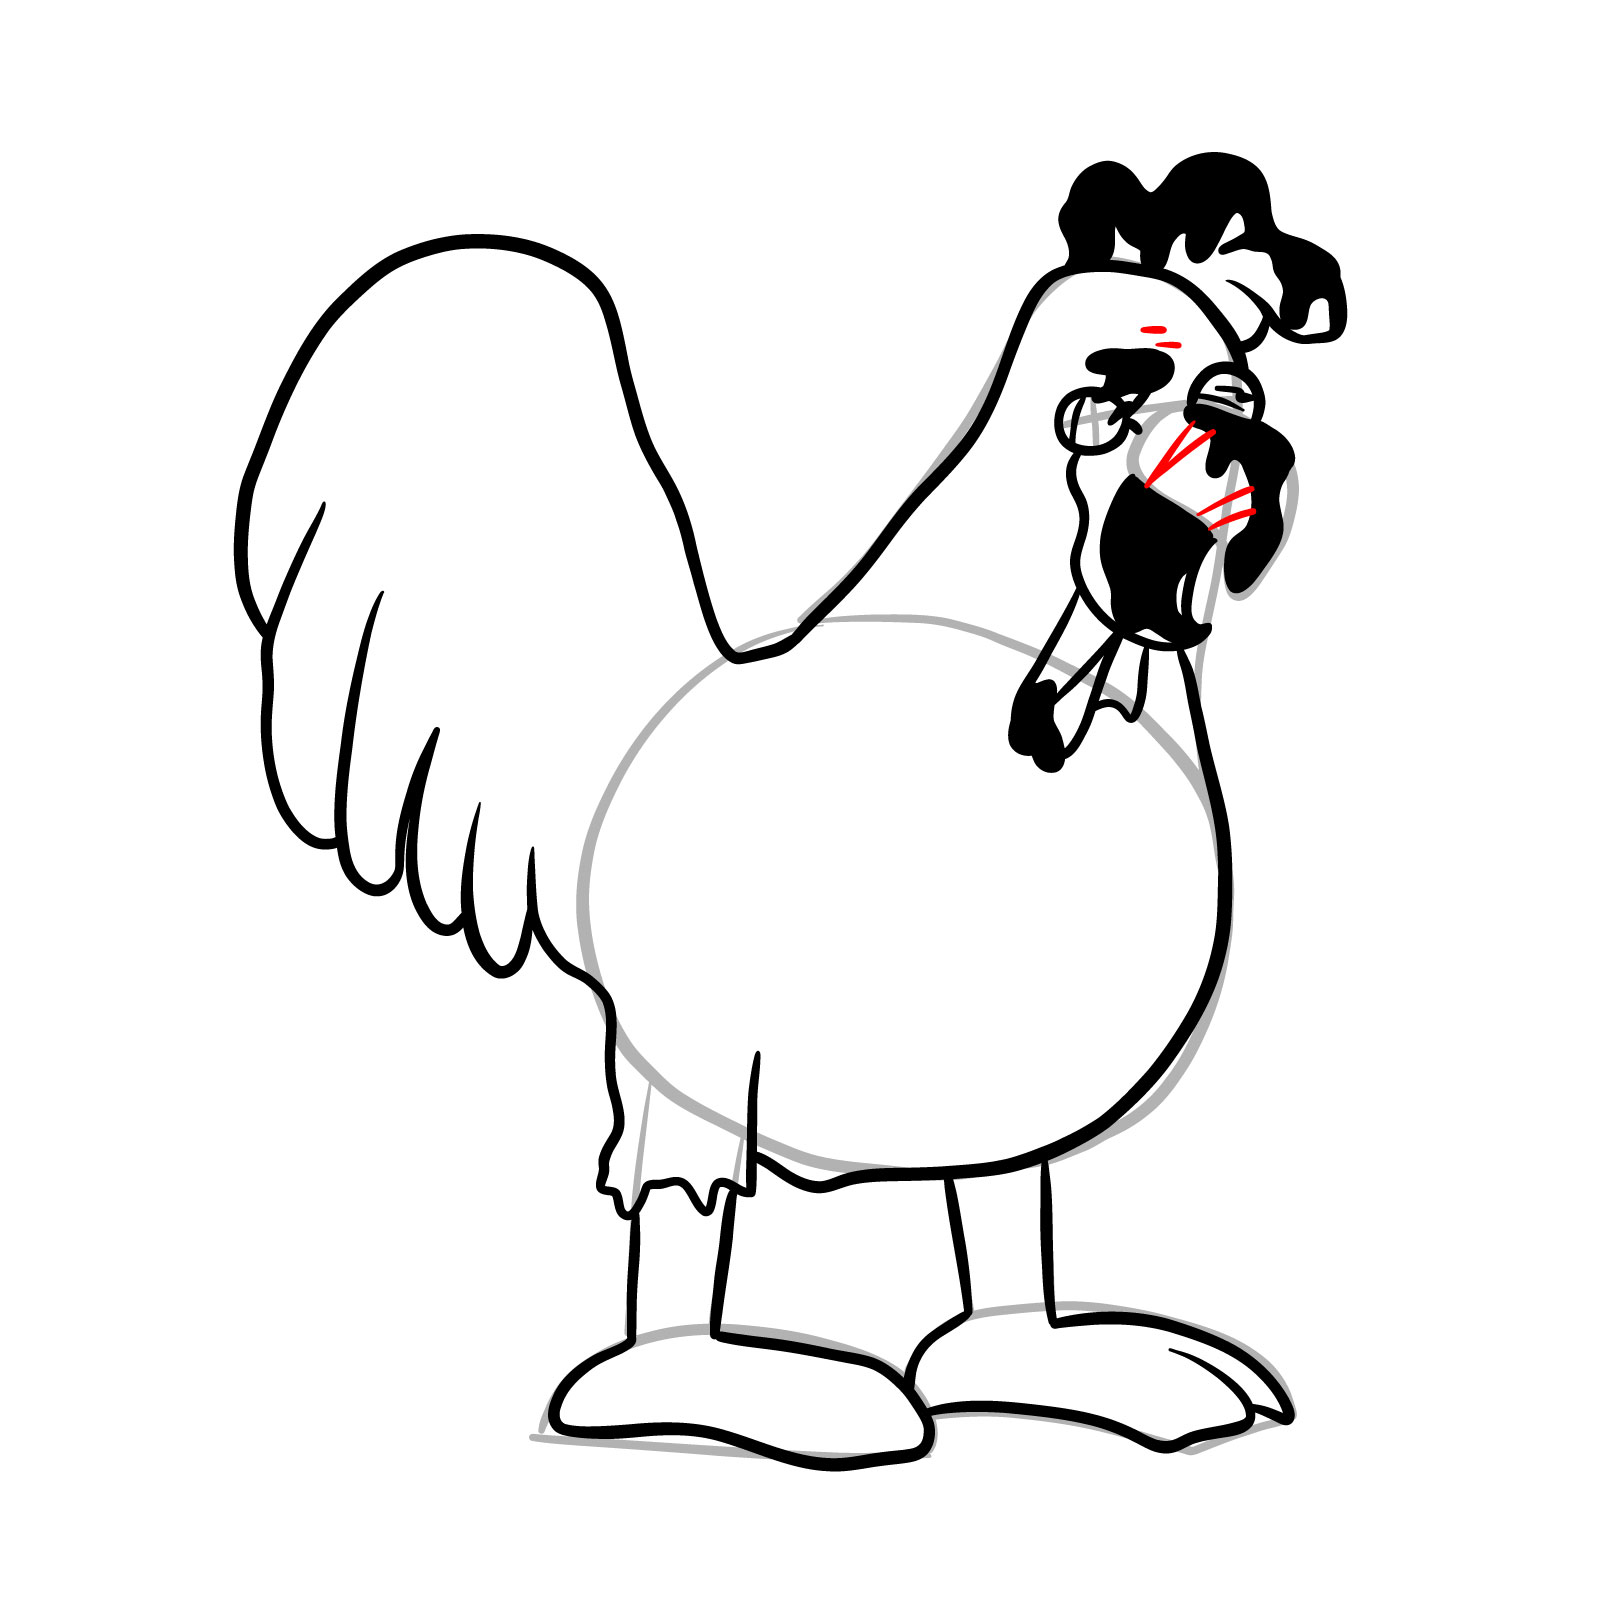 How to draw Corrupted Ernie the Chicken - step 19